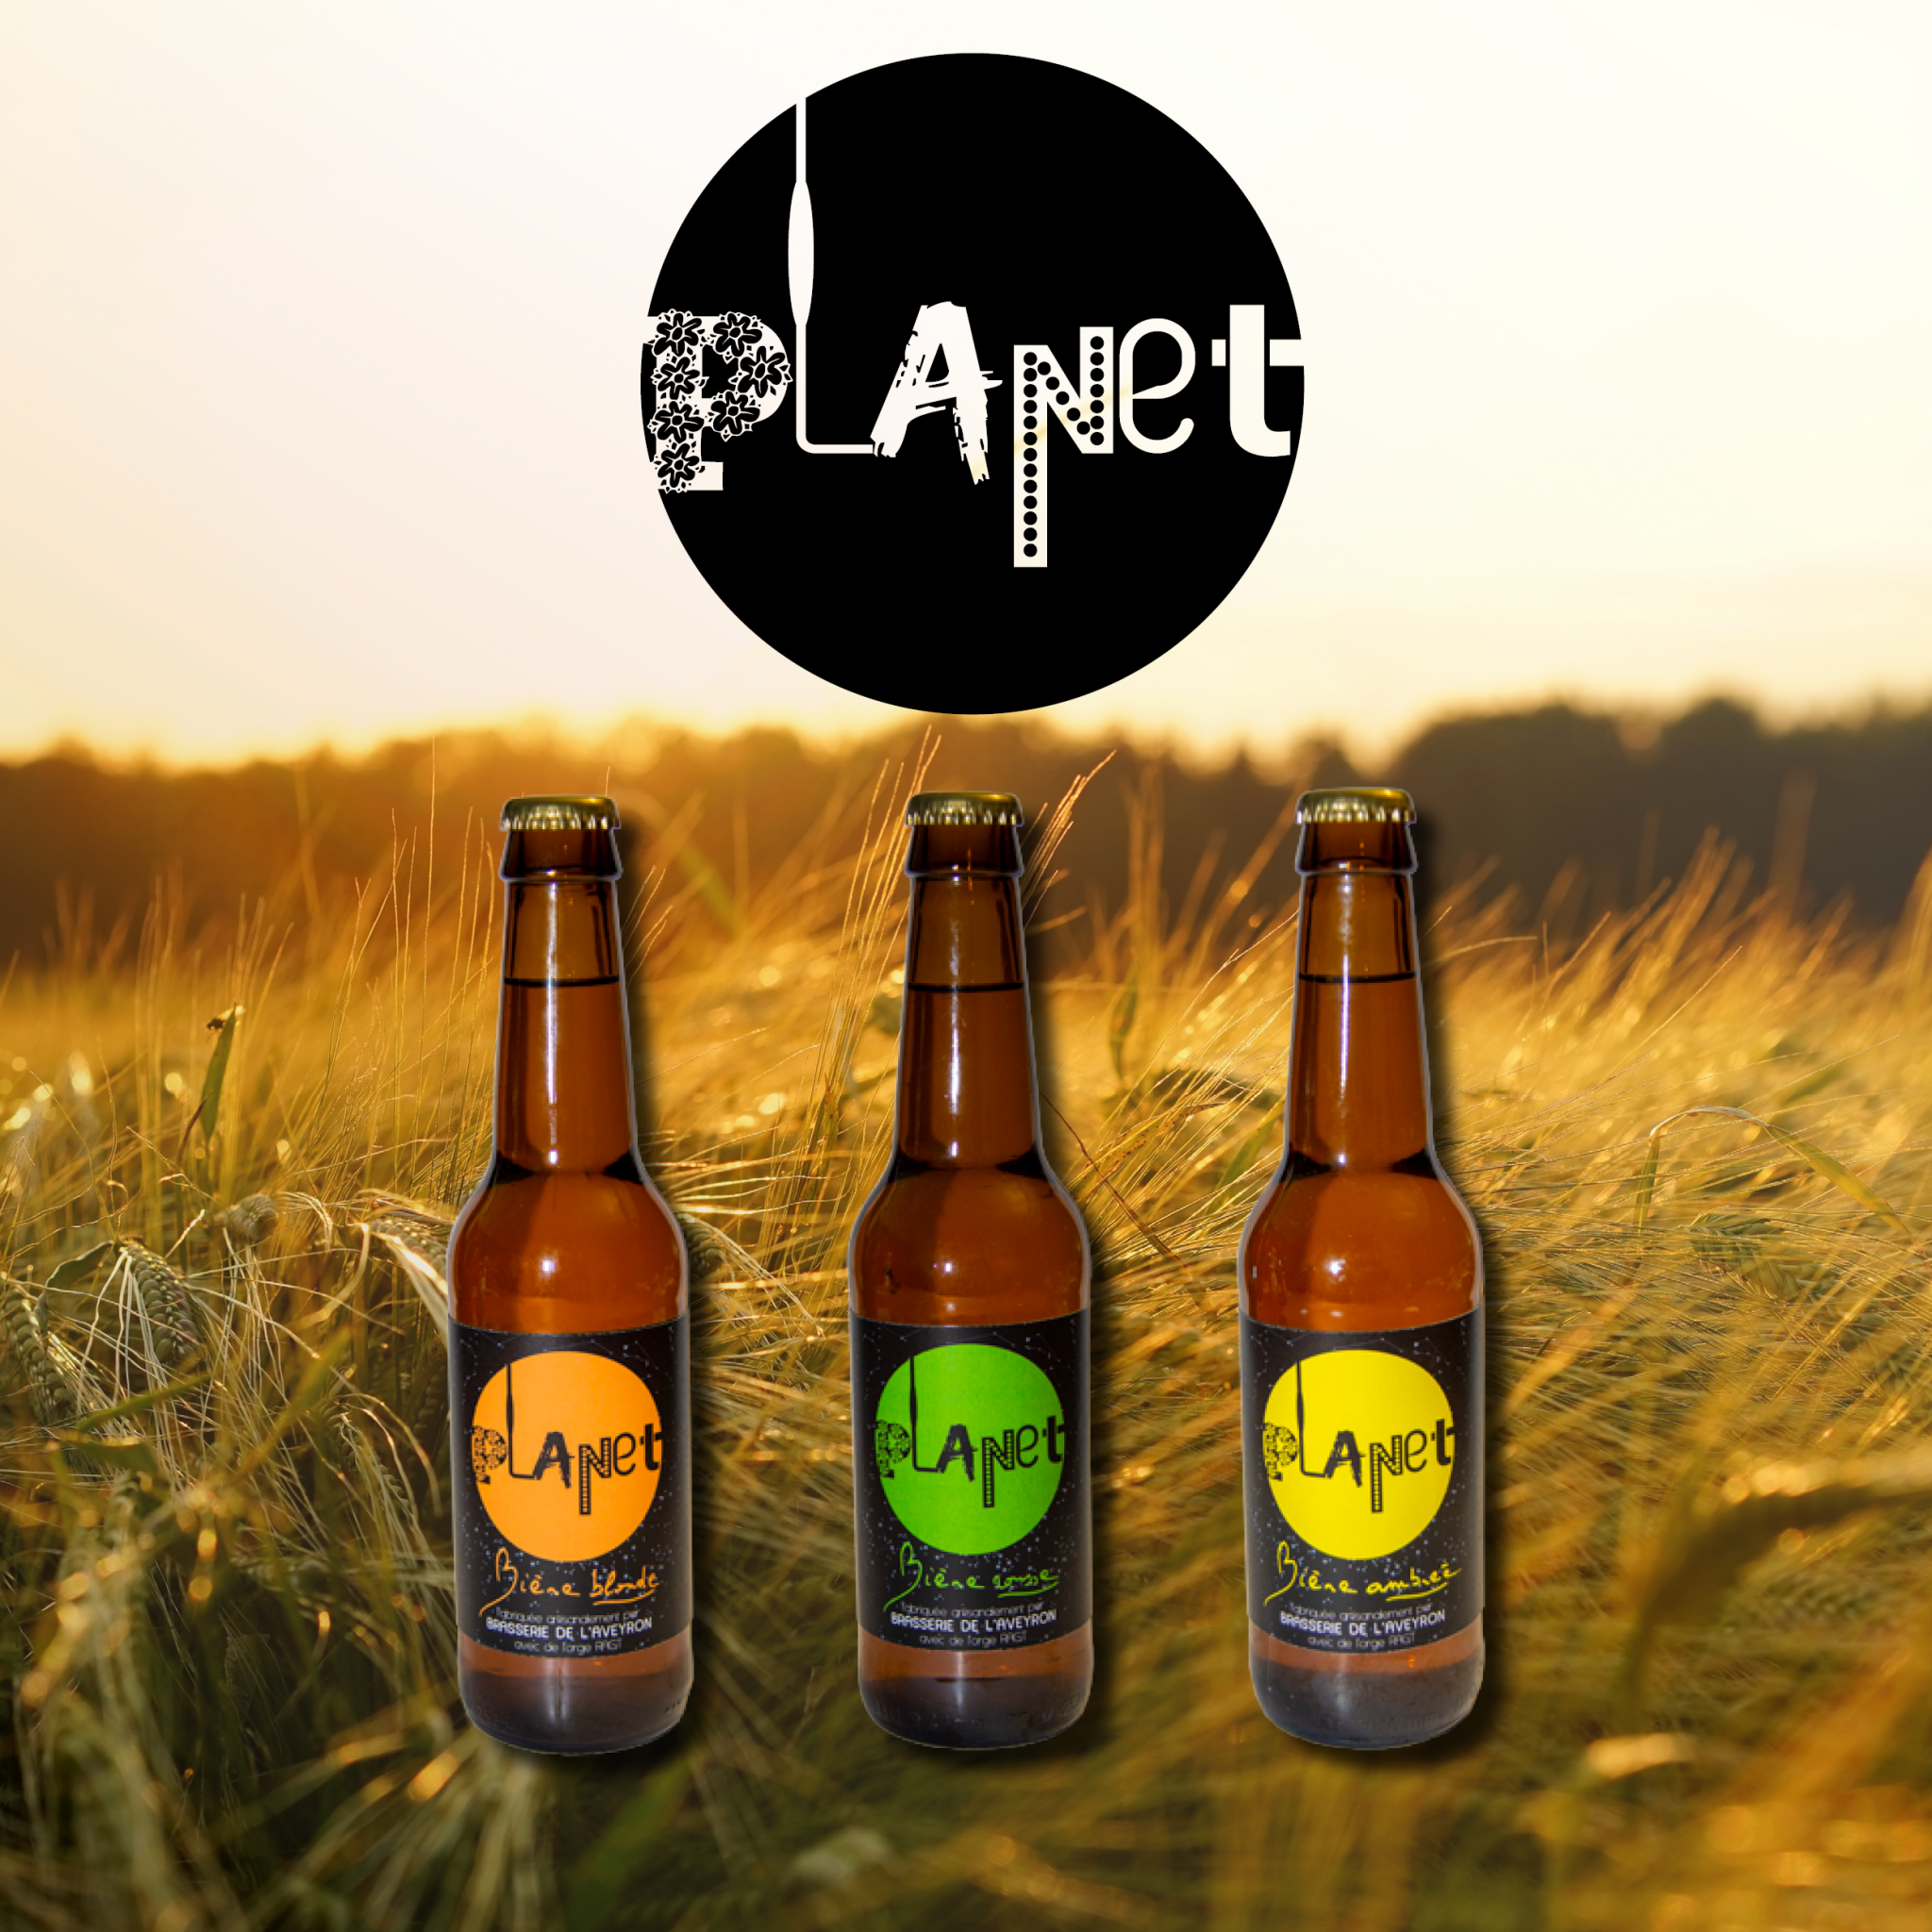 RAGT launches its beer brand Planet